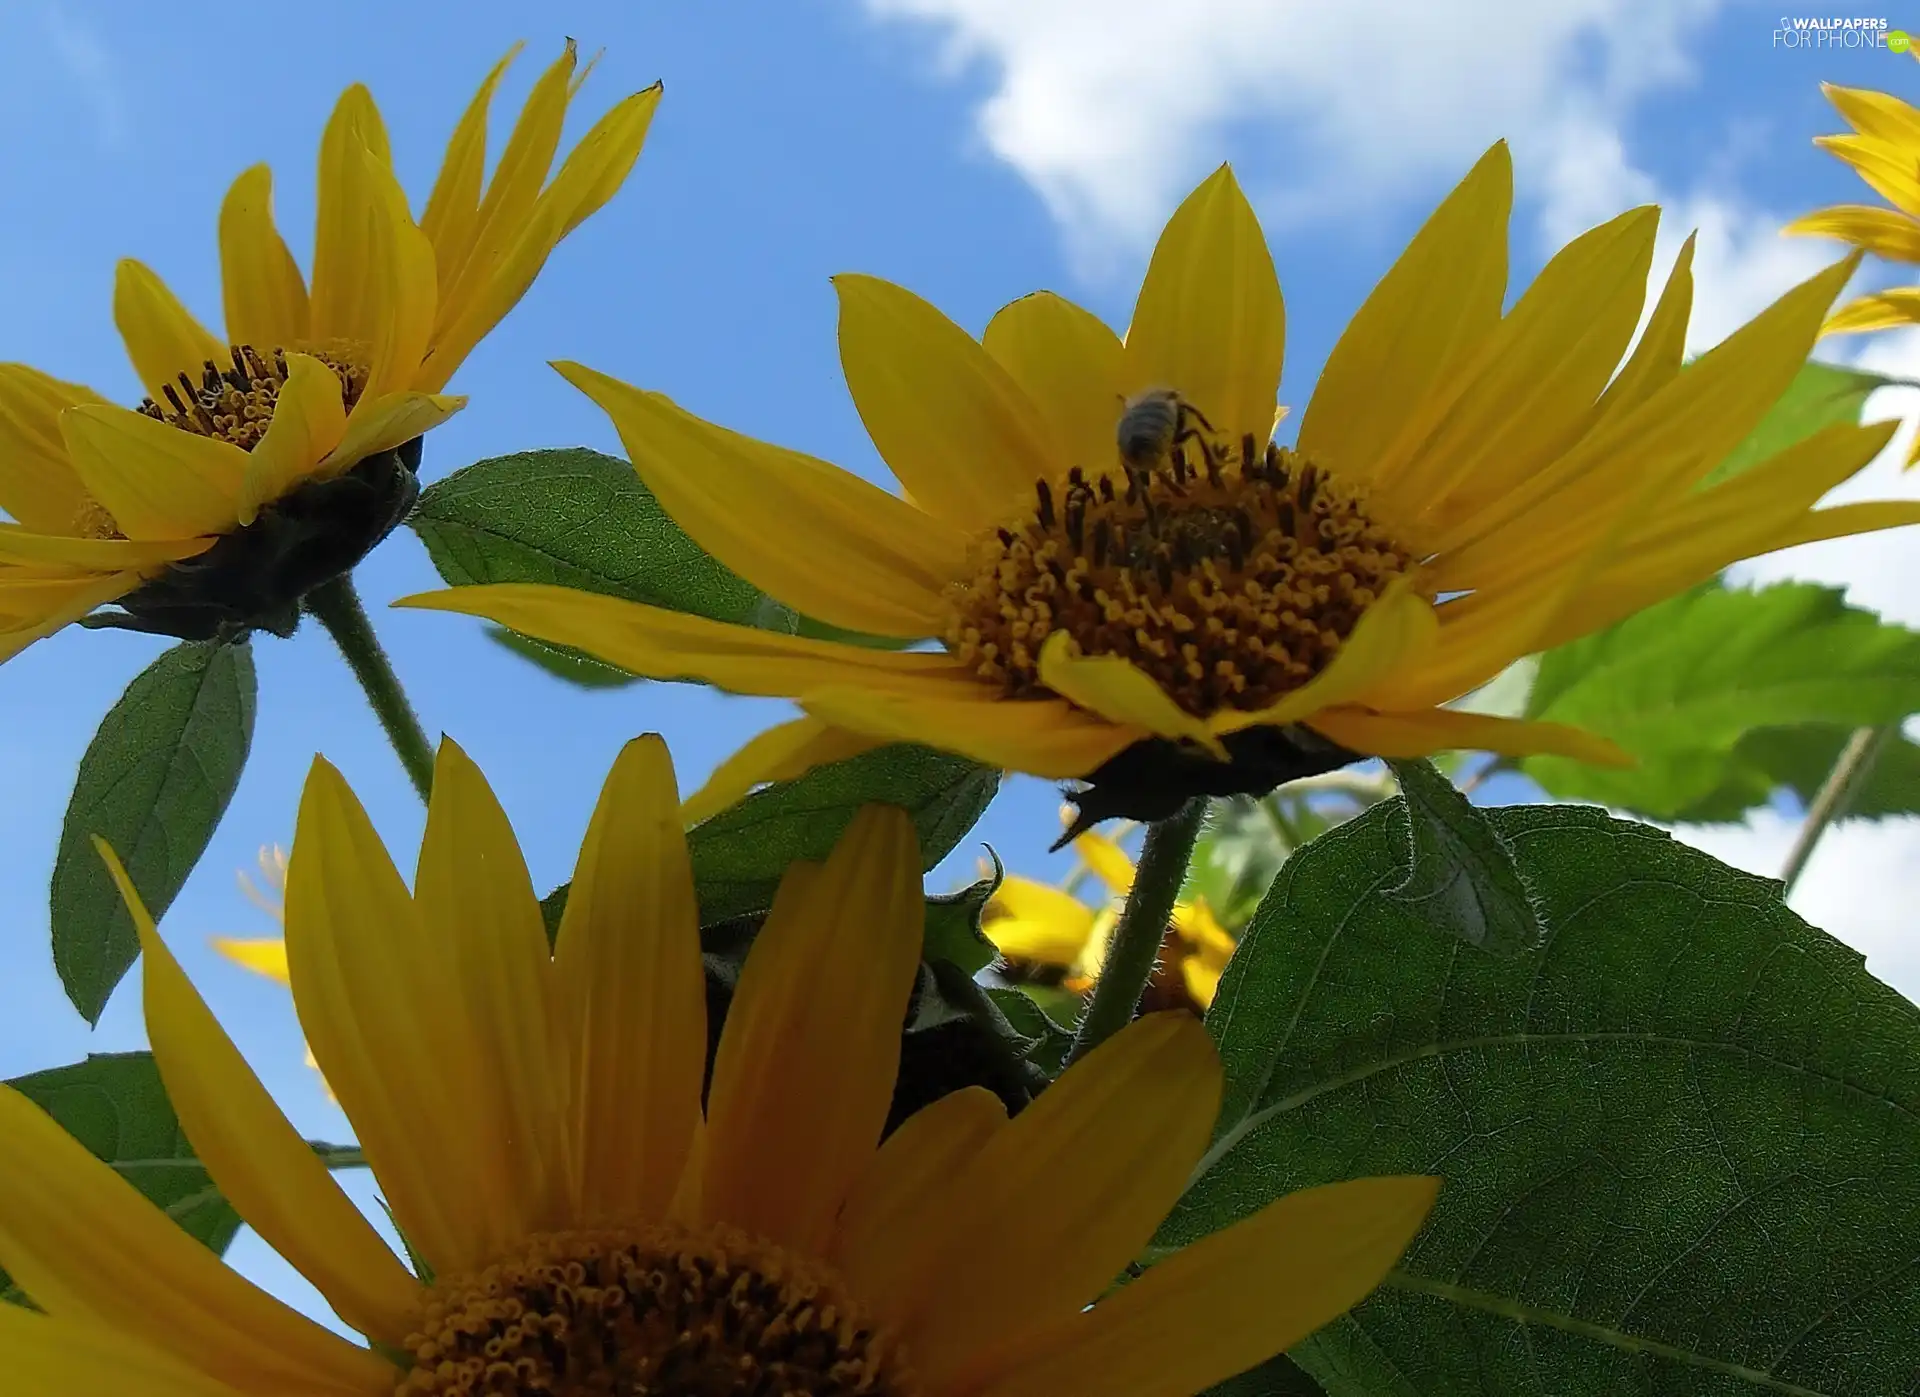 Nice sunflowers, Insect